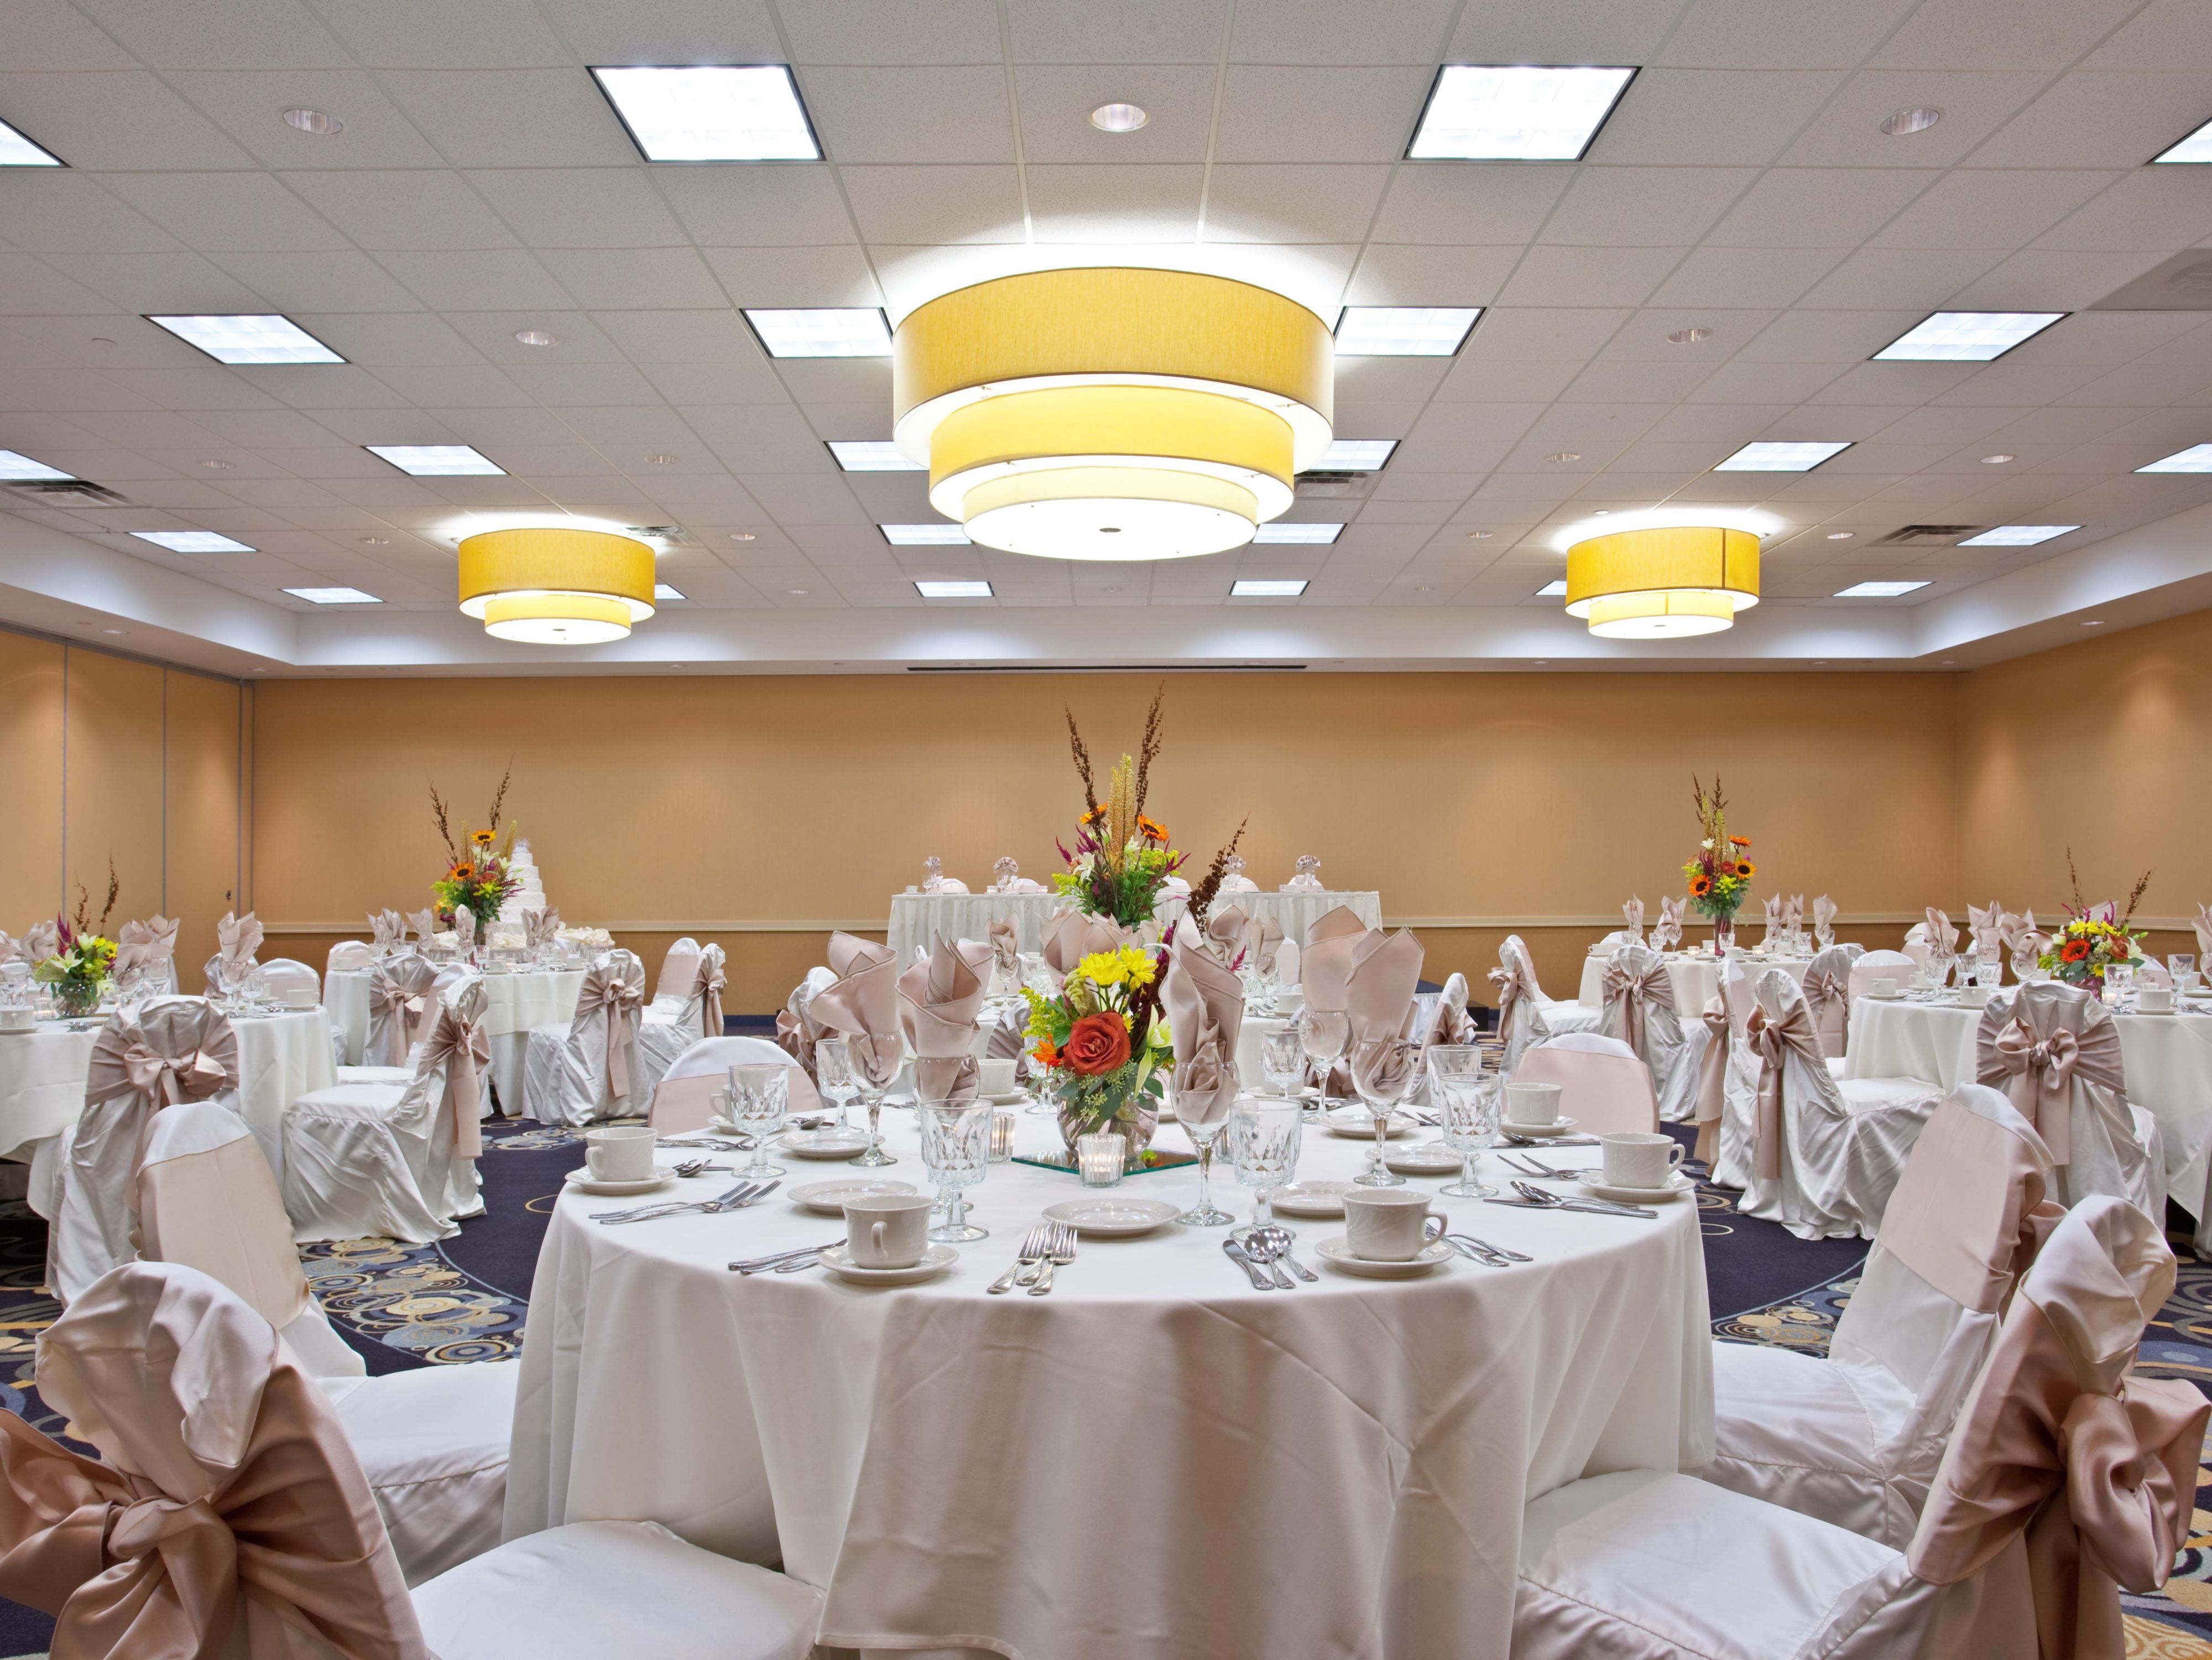 Let us bring your wedding day vision to life! Our Woodfield Ballroom is the perfect location to celebrate. The ballroom can accommodate up to 300 people. Contact us today to learn more!